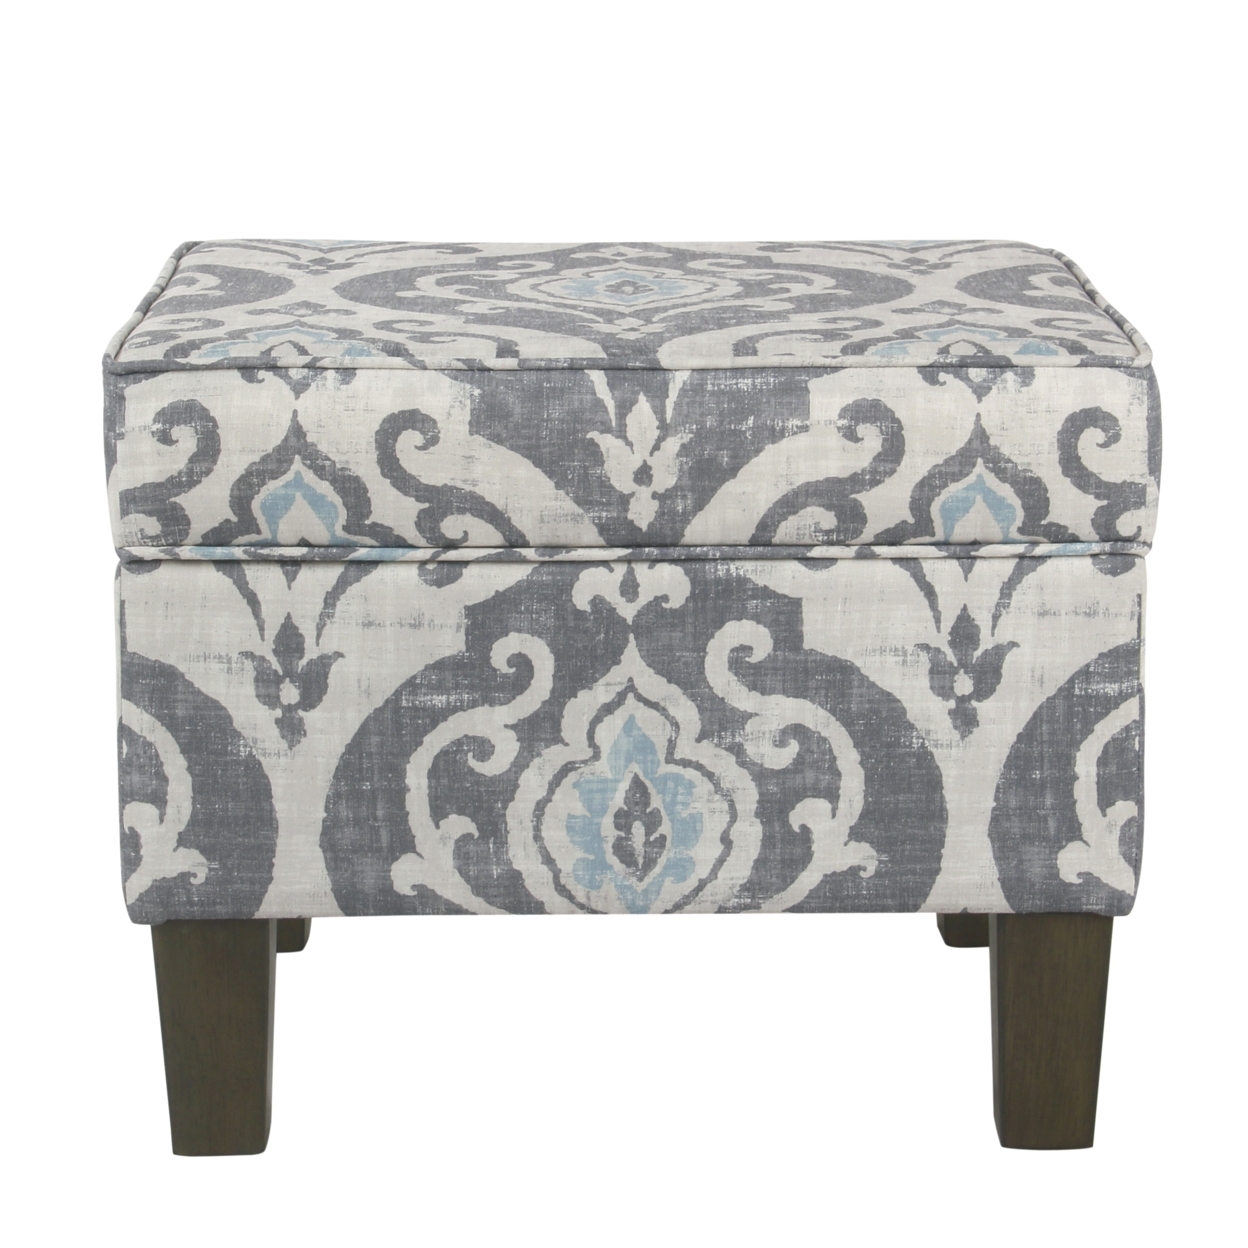 Wooden Ottoman With Patterned Fabric Upholstery And Hidden Storage, Gray And Blue- Saltoro Sherpi